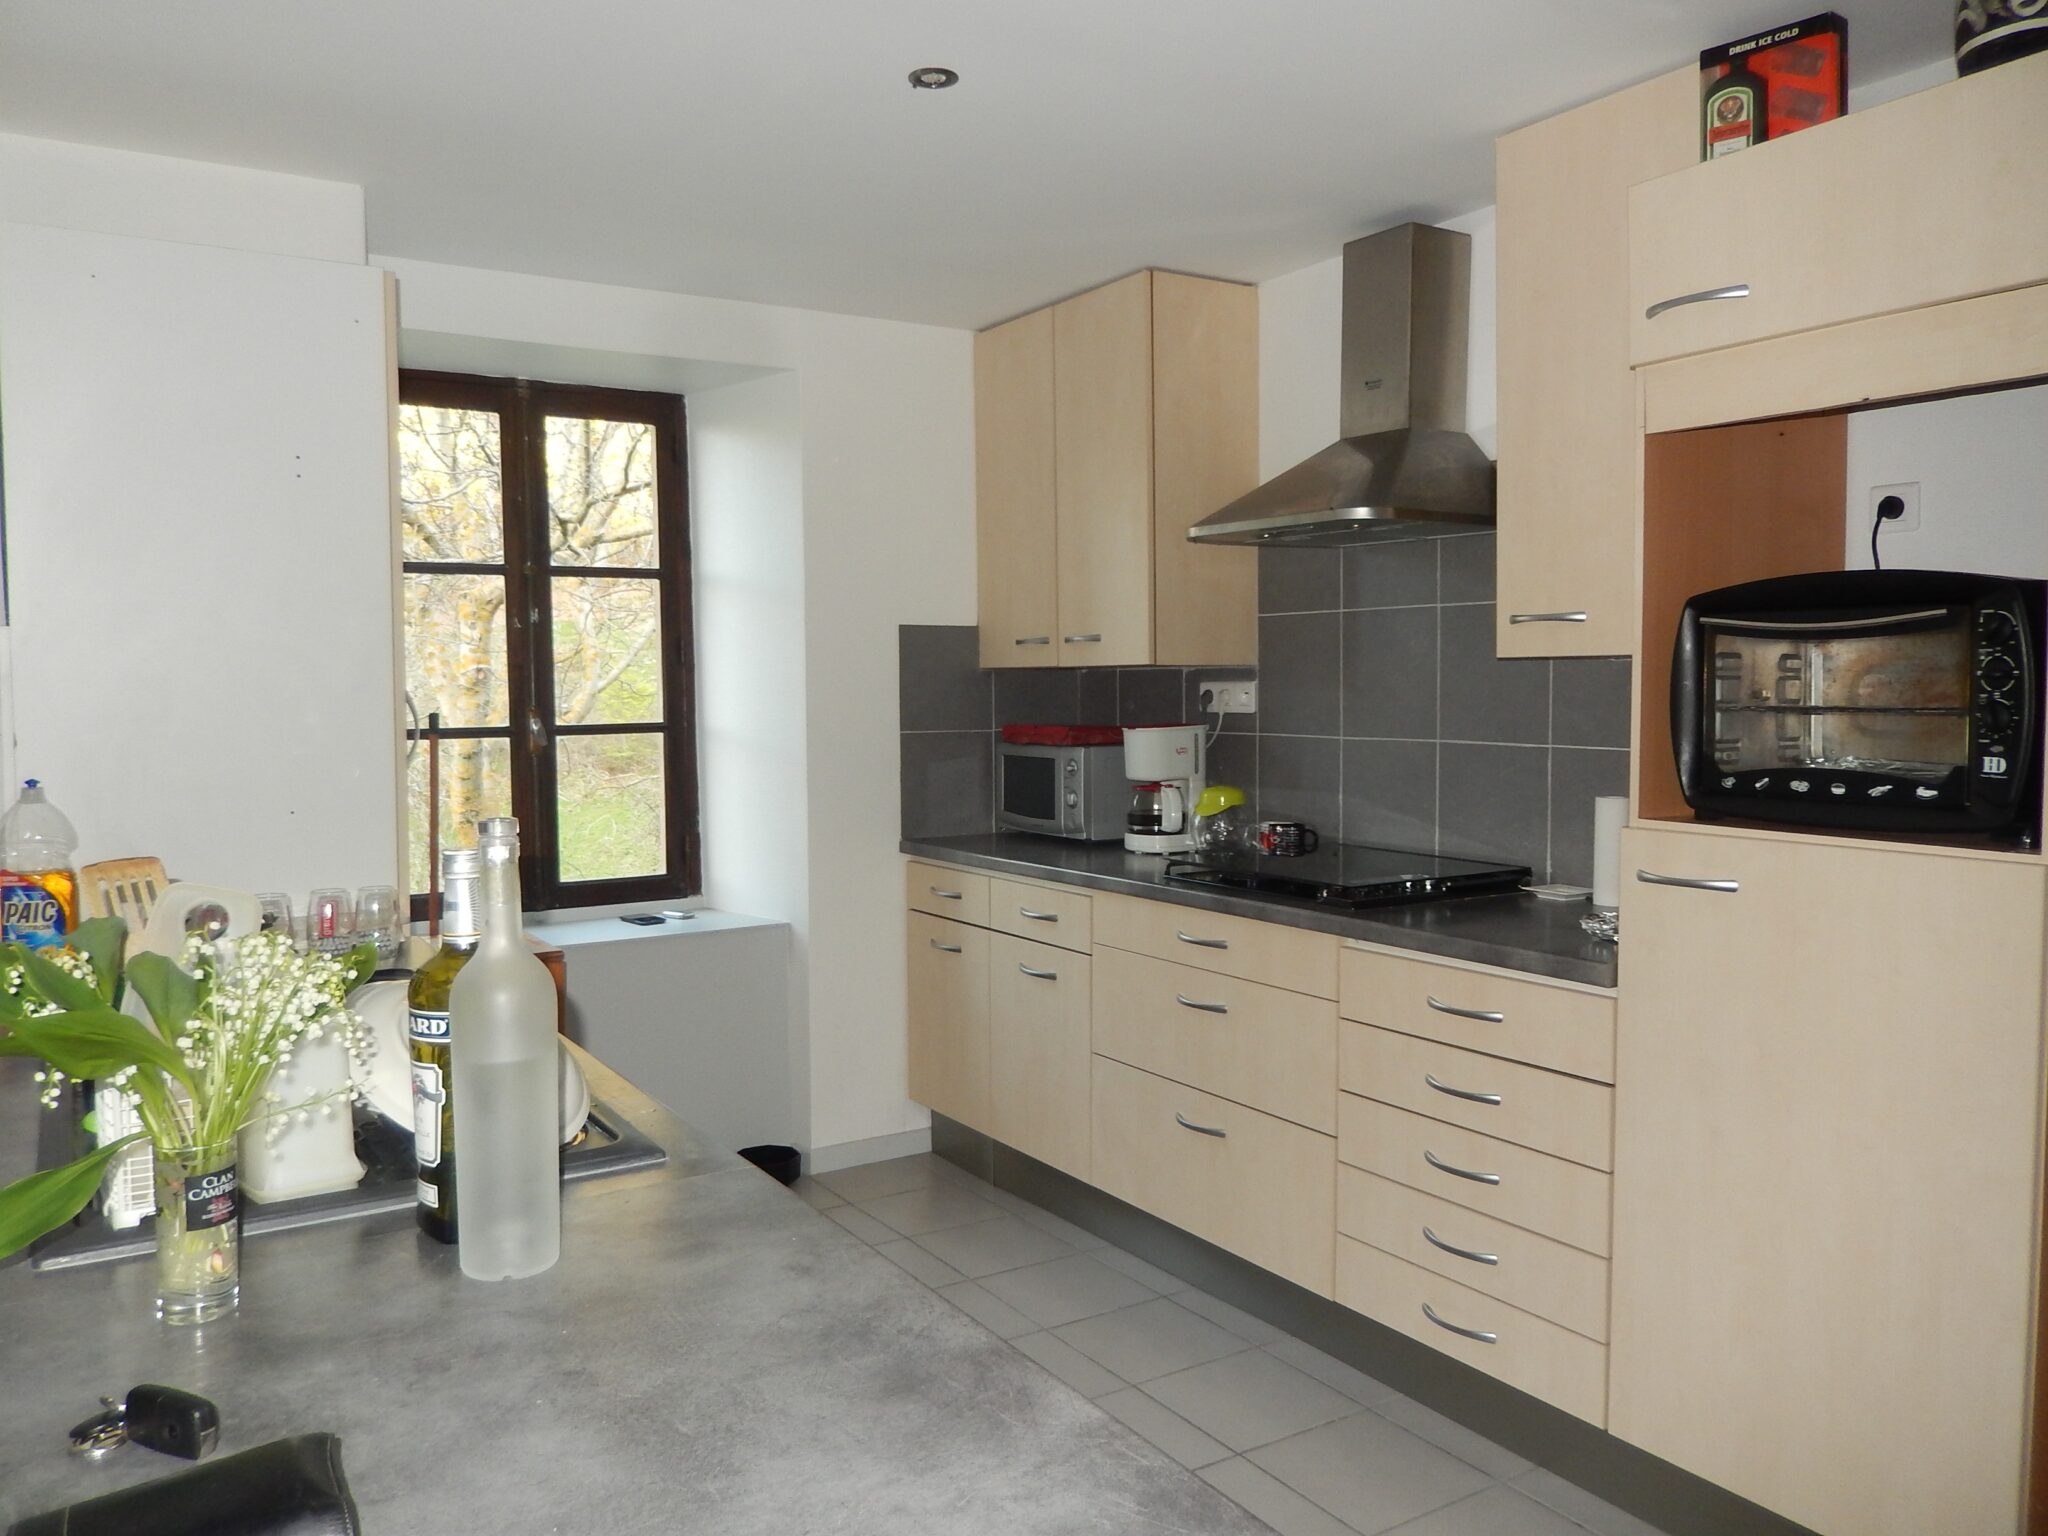 The advantages and drawbacks of a kitchen hutch